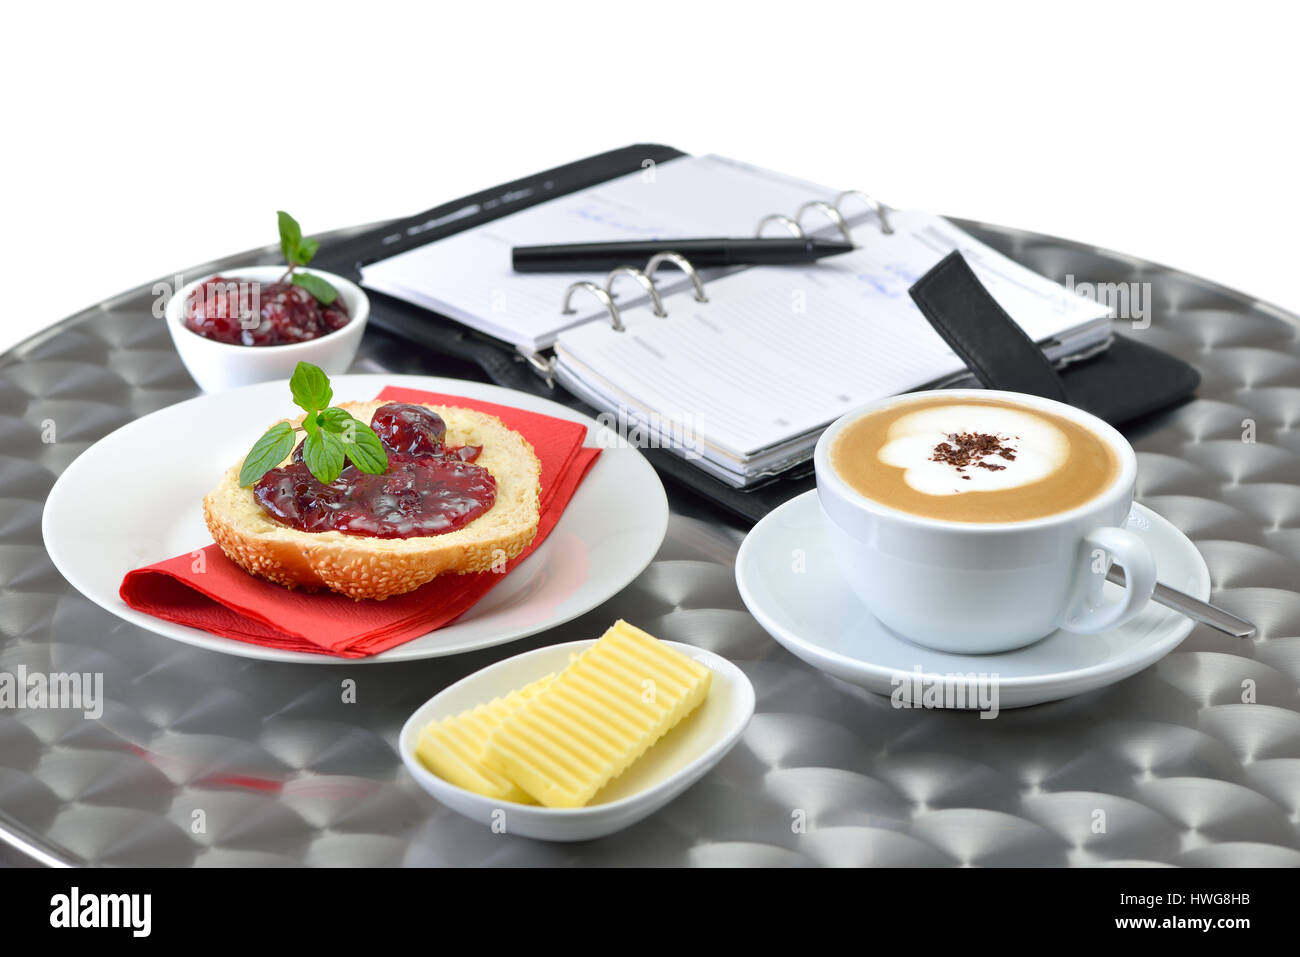 Business breakfast: a fresh sesame roll with cherry jam and a cup of cappuccino; a personal organizer in the background Stock Photo